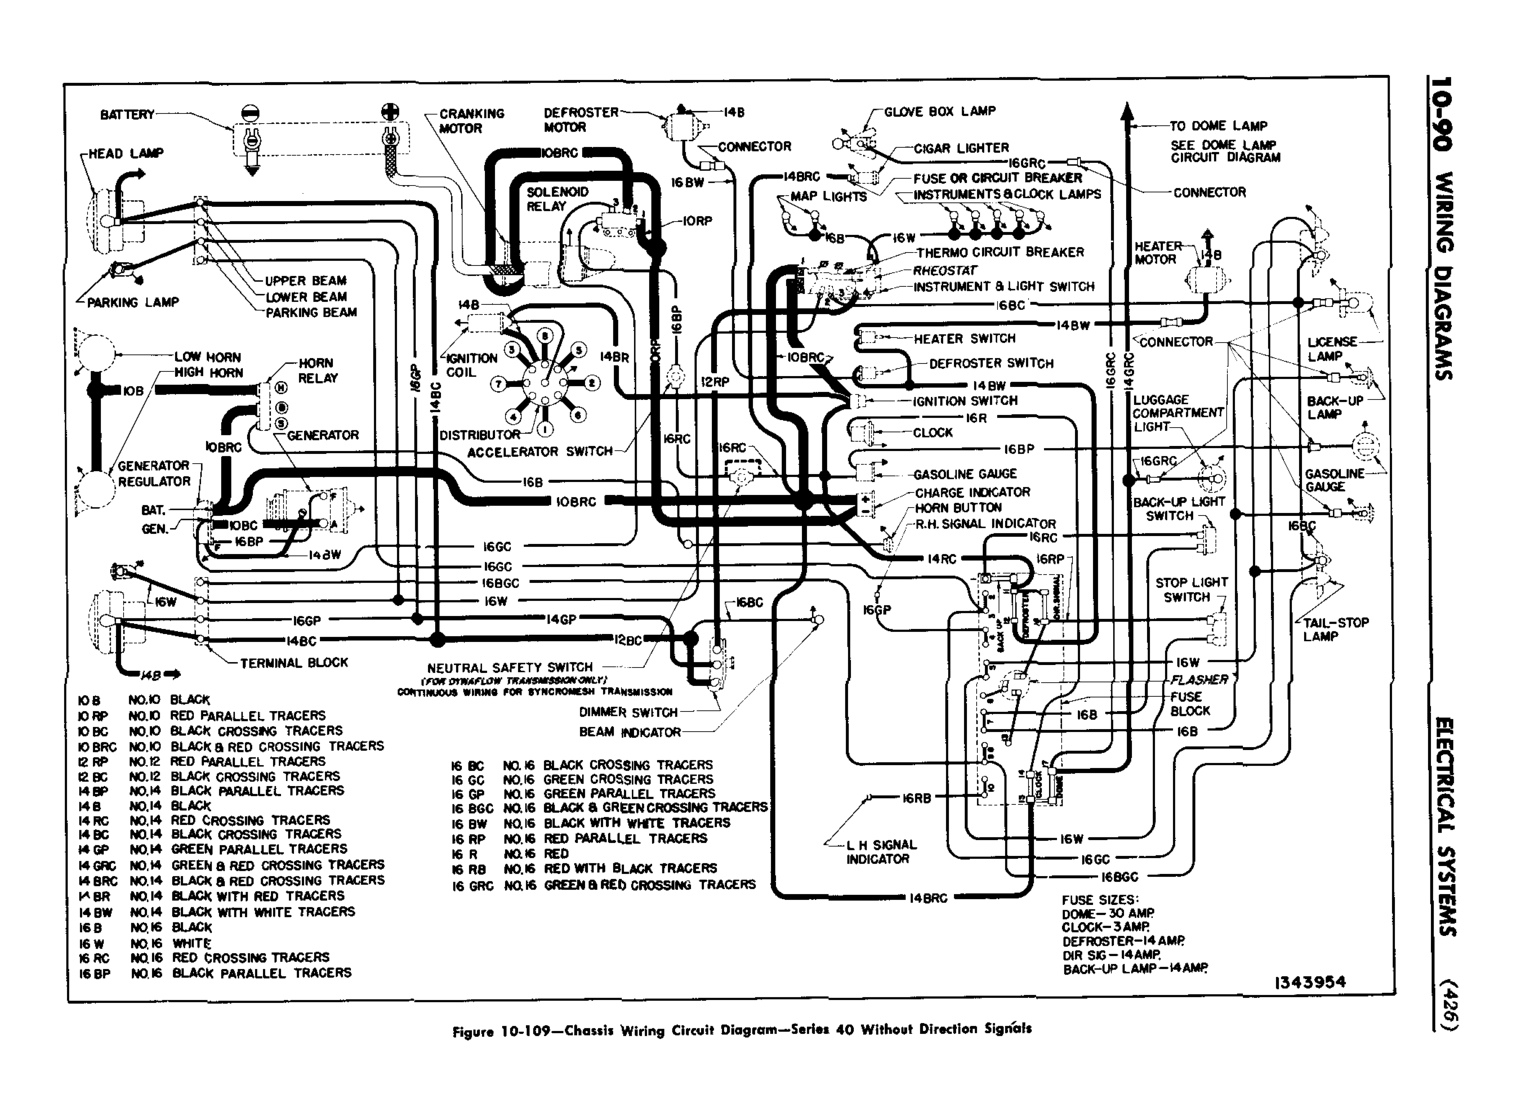 n_11 1952 Buick Shop Manual - Electrical Systems-090-090.jpg